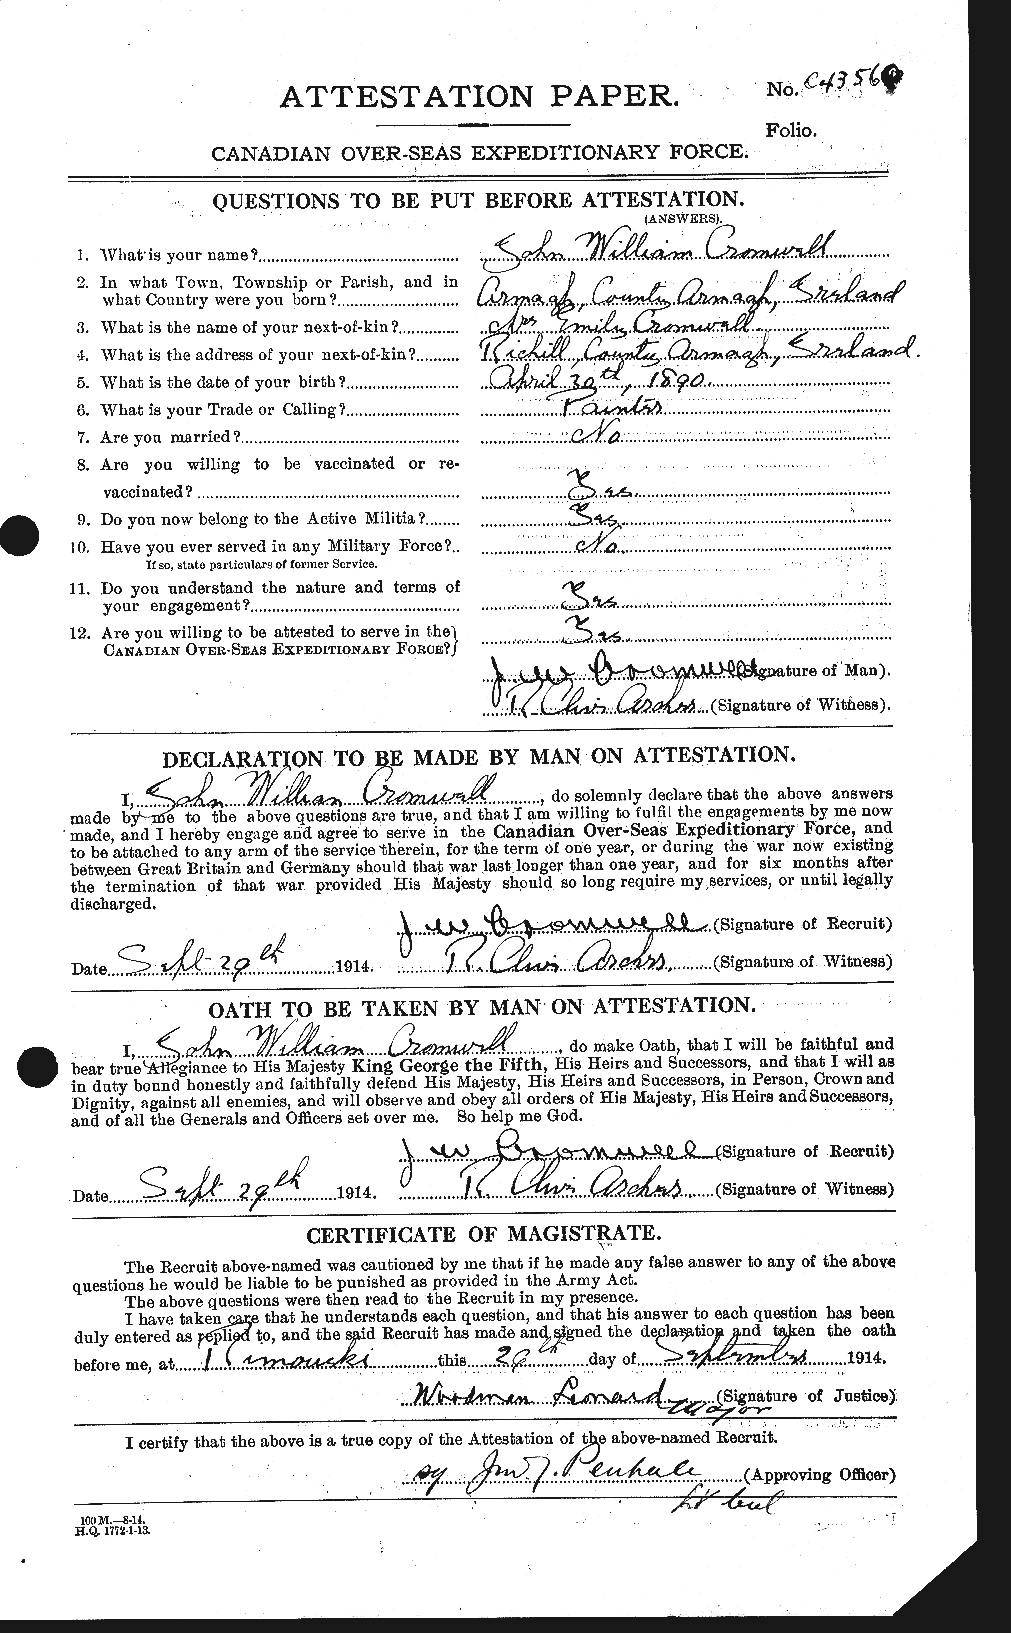 Personnel Records of the First World War - CEF 064920a